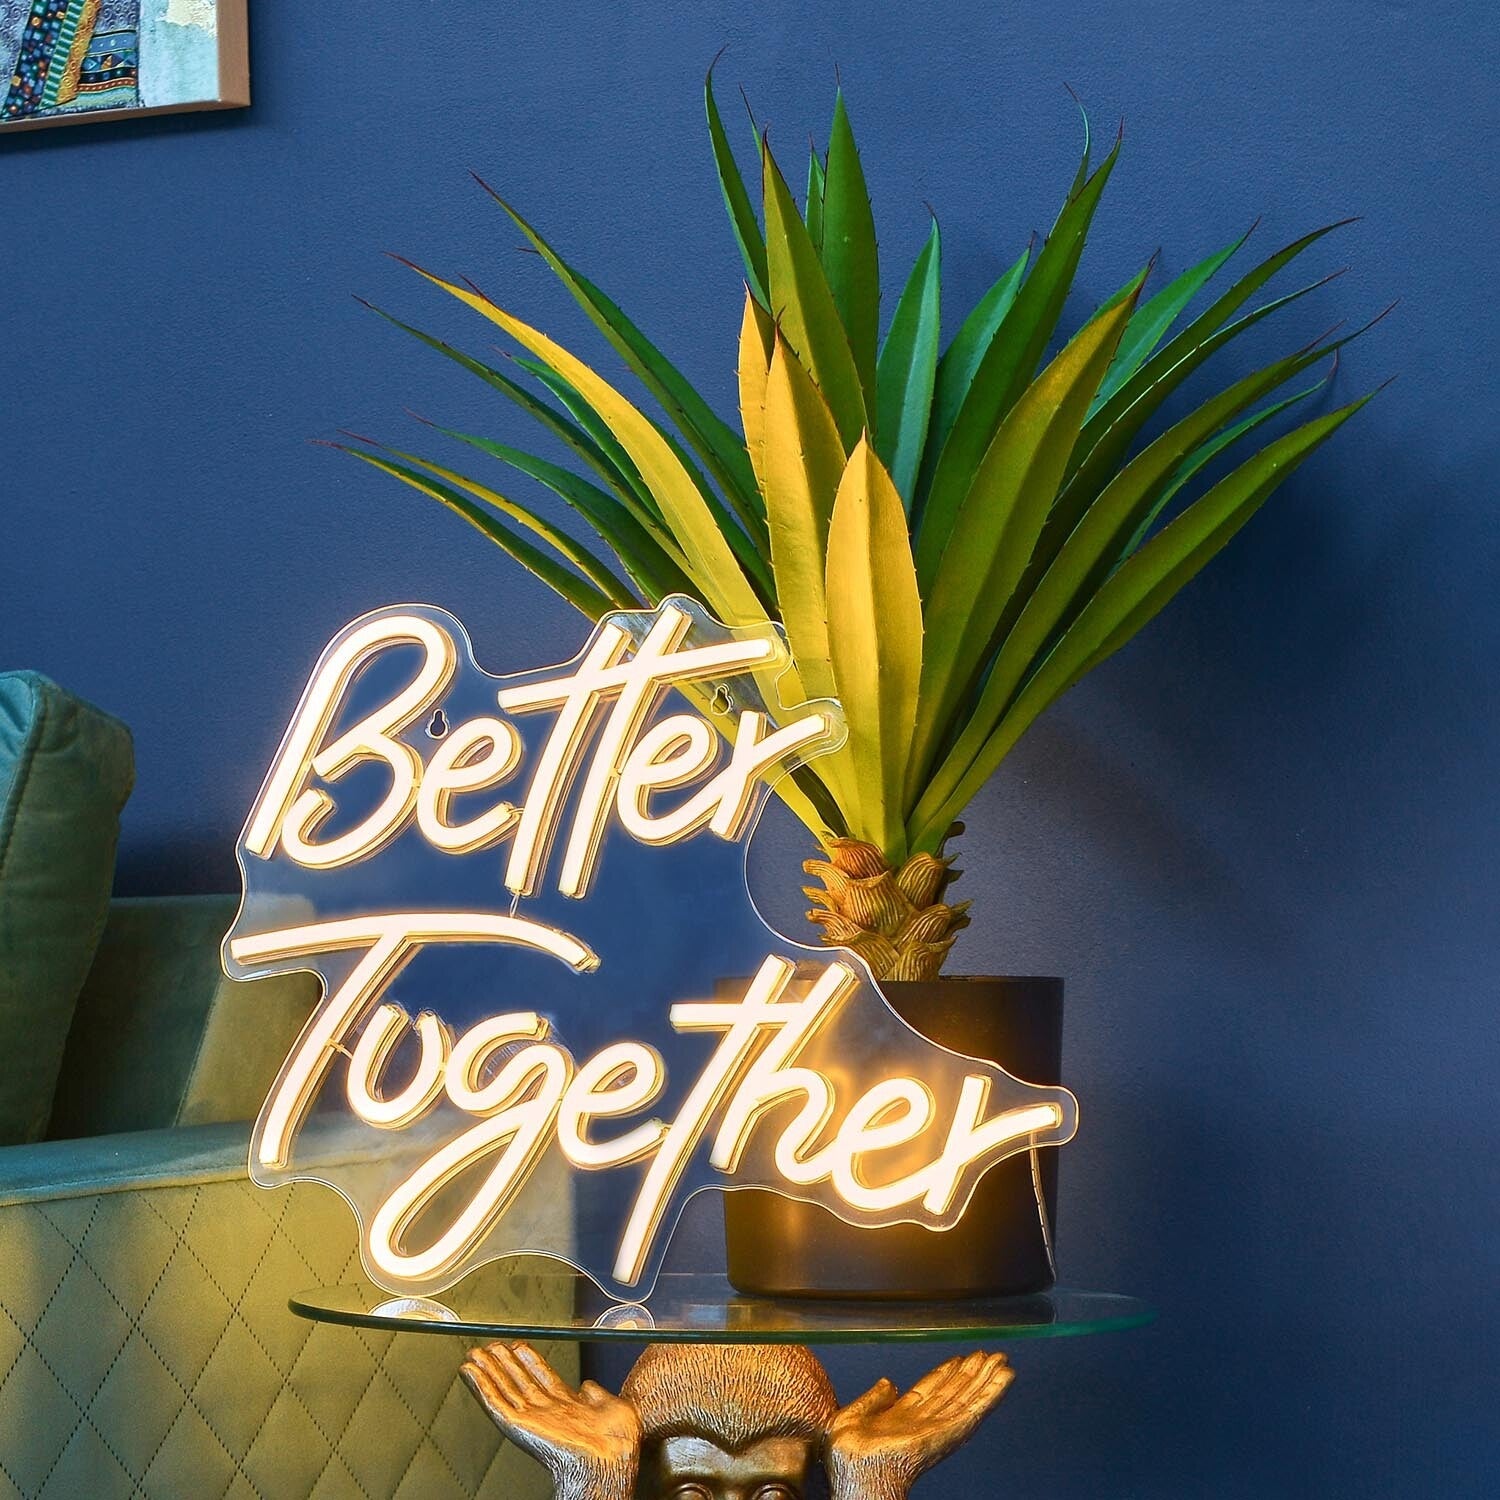 Neon sign "Better Together" - an undeniable attraction